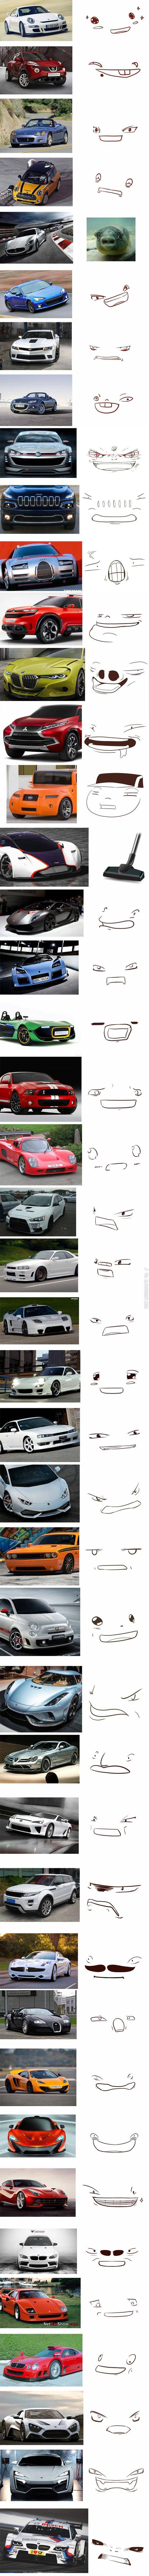 Cars+and+Their+Faces